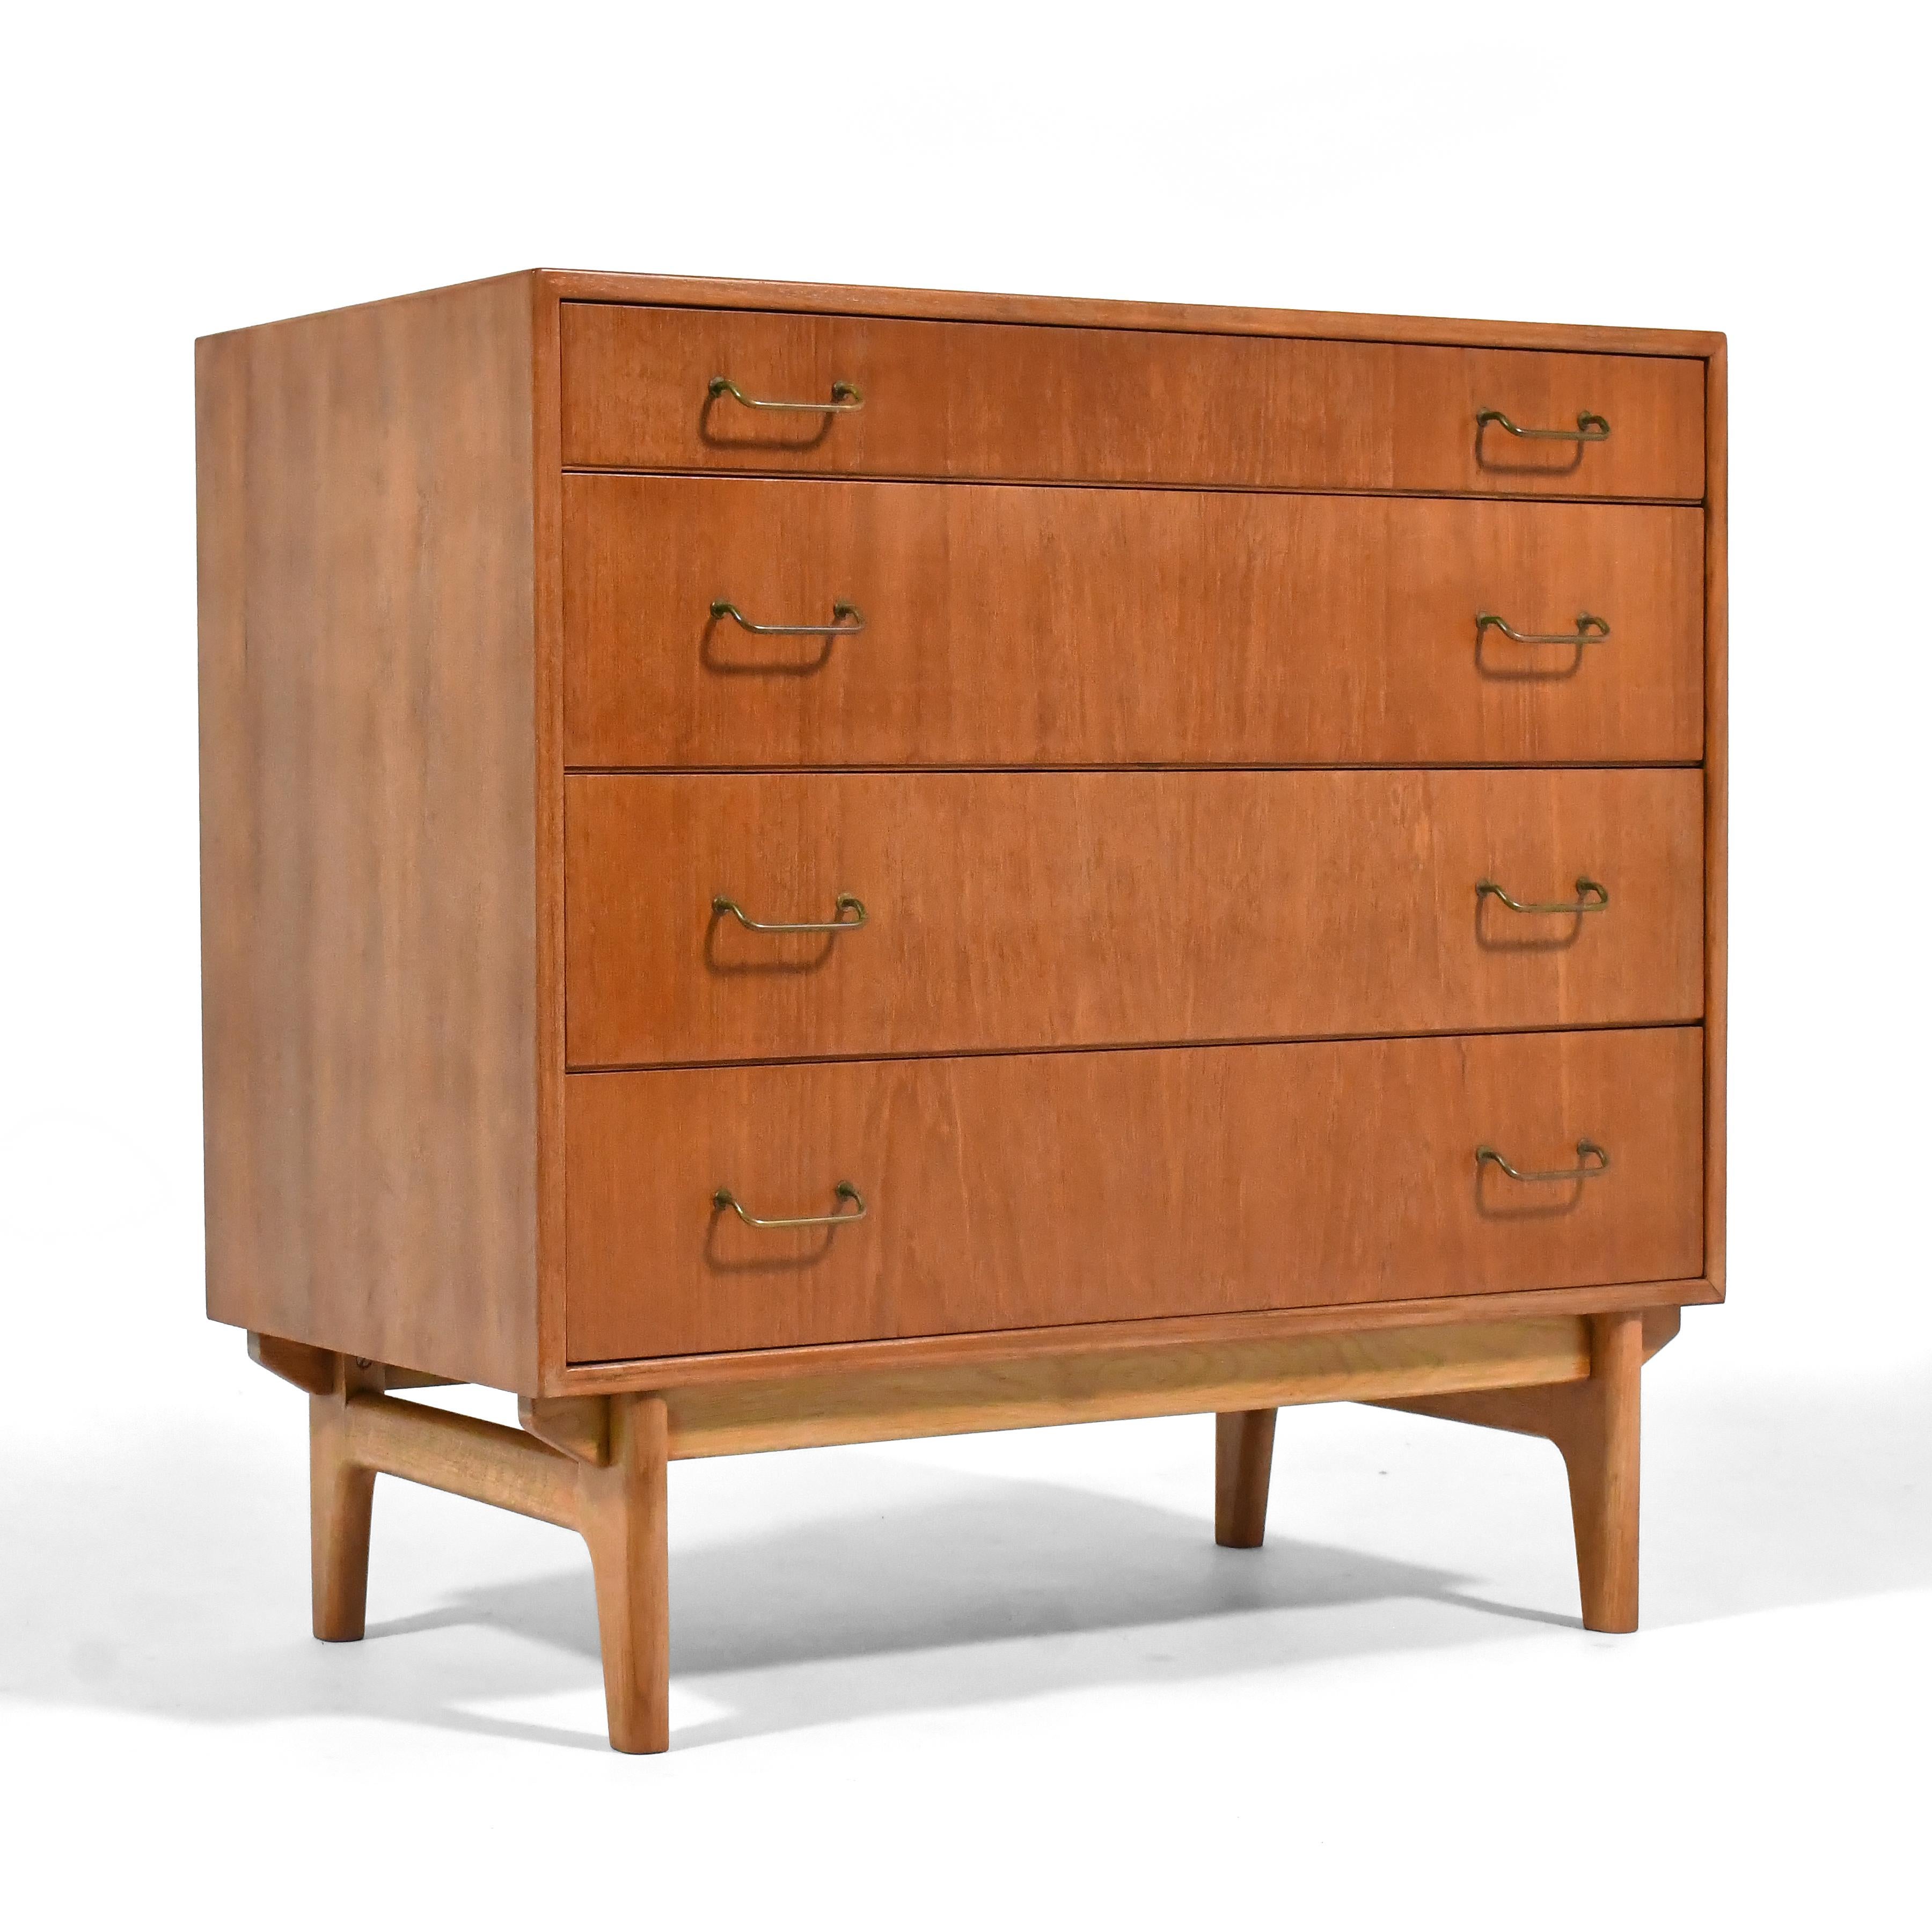 This beautiful Danish modern dresser in teak and oak by Torben Strandgaard is finely crafted by Møbelfabriken Falster and beautifully detailed with a chassis base and brass wire pulls. In additional to this smaller four drawer dresser, we have a